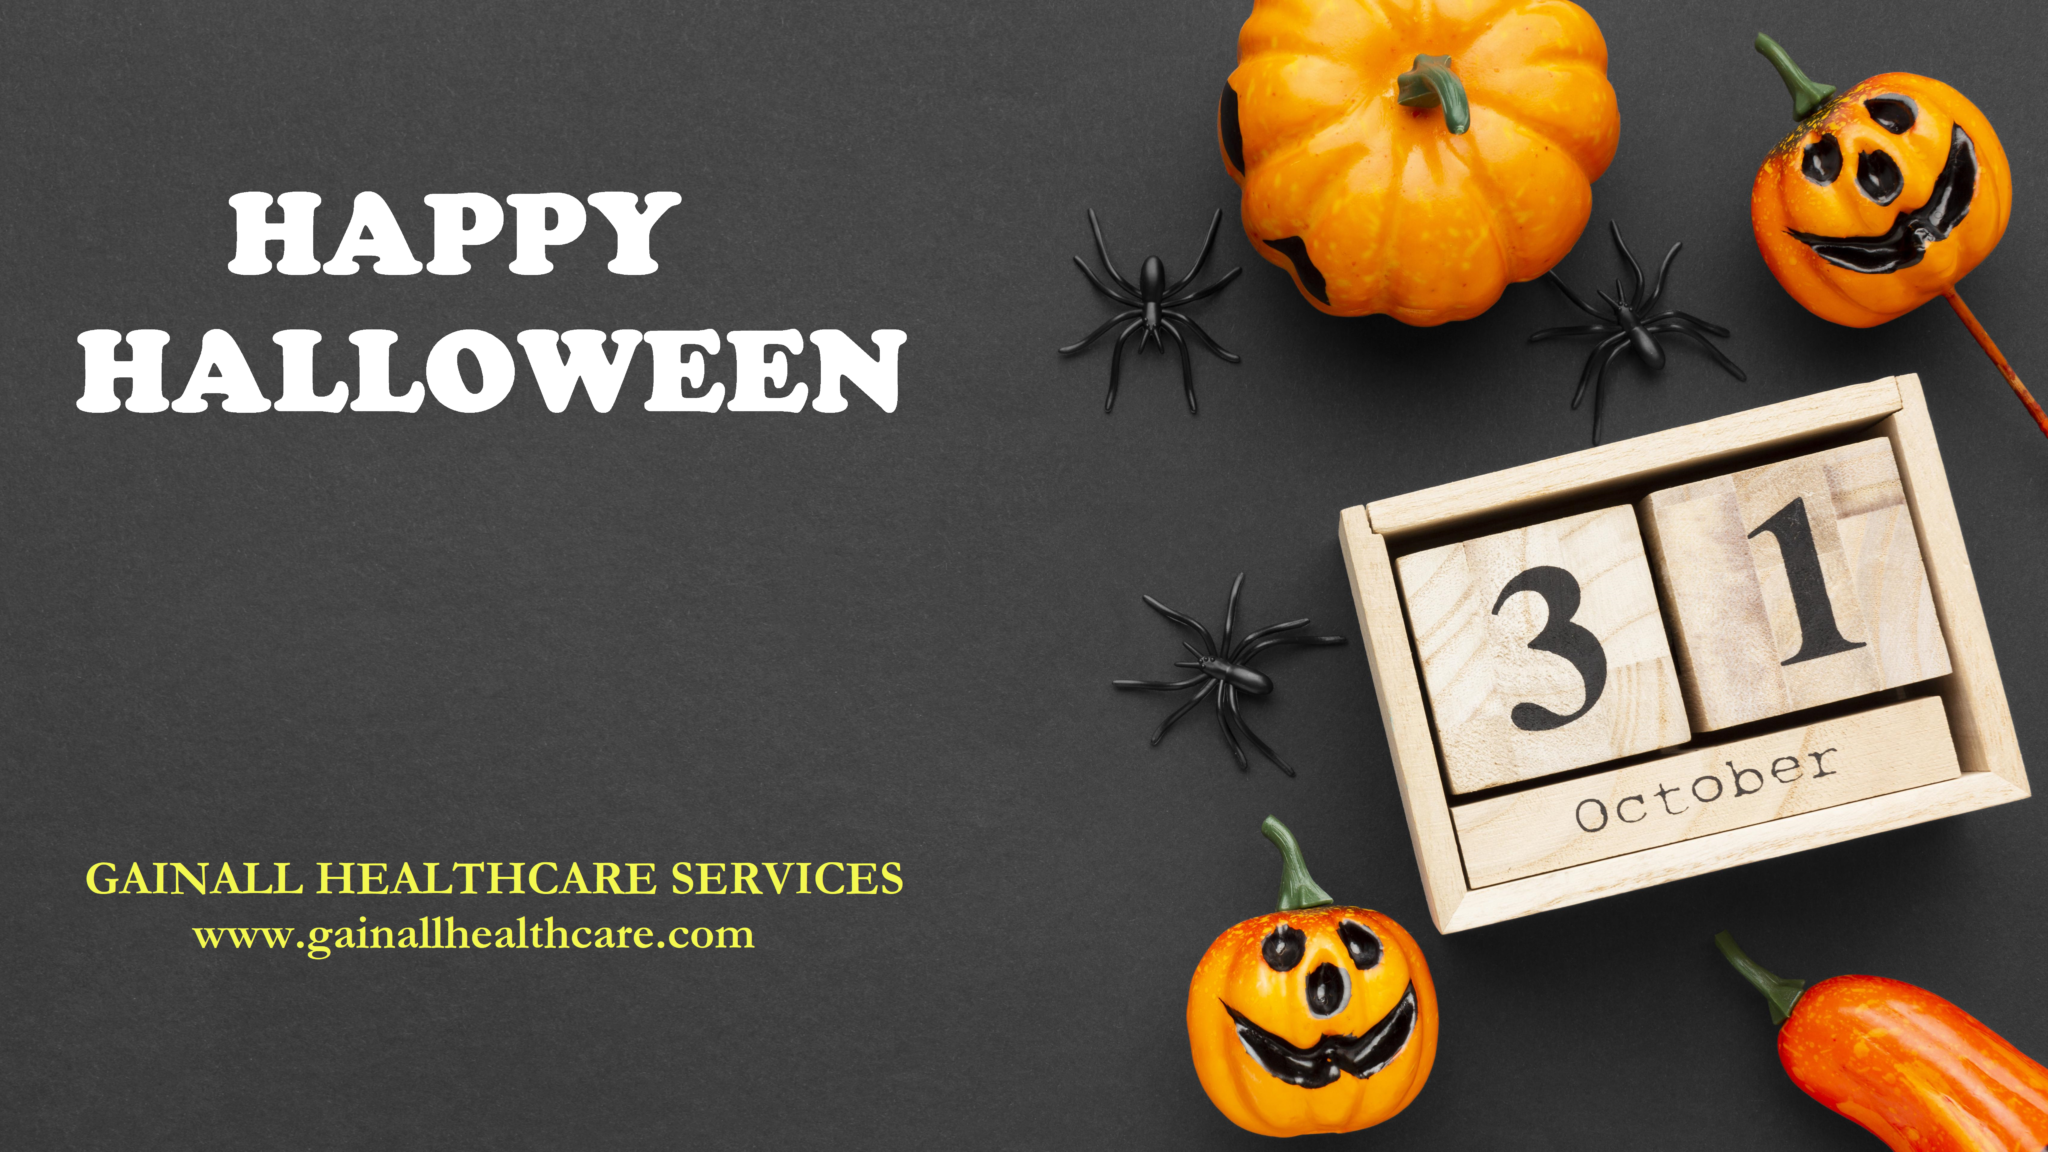 Happy Halloween - Gainall Healthcare Services